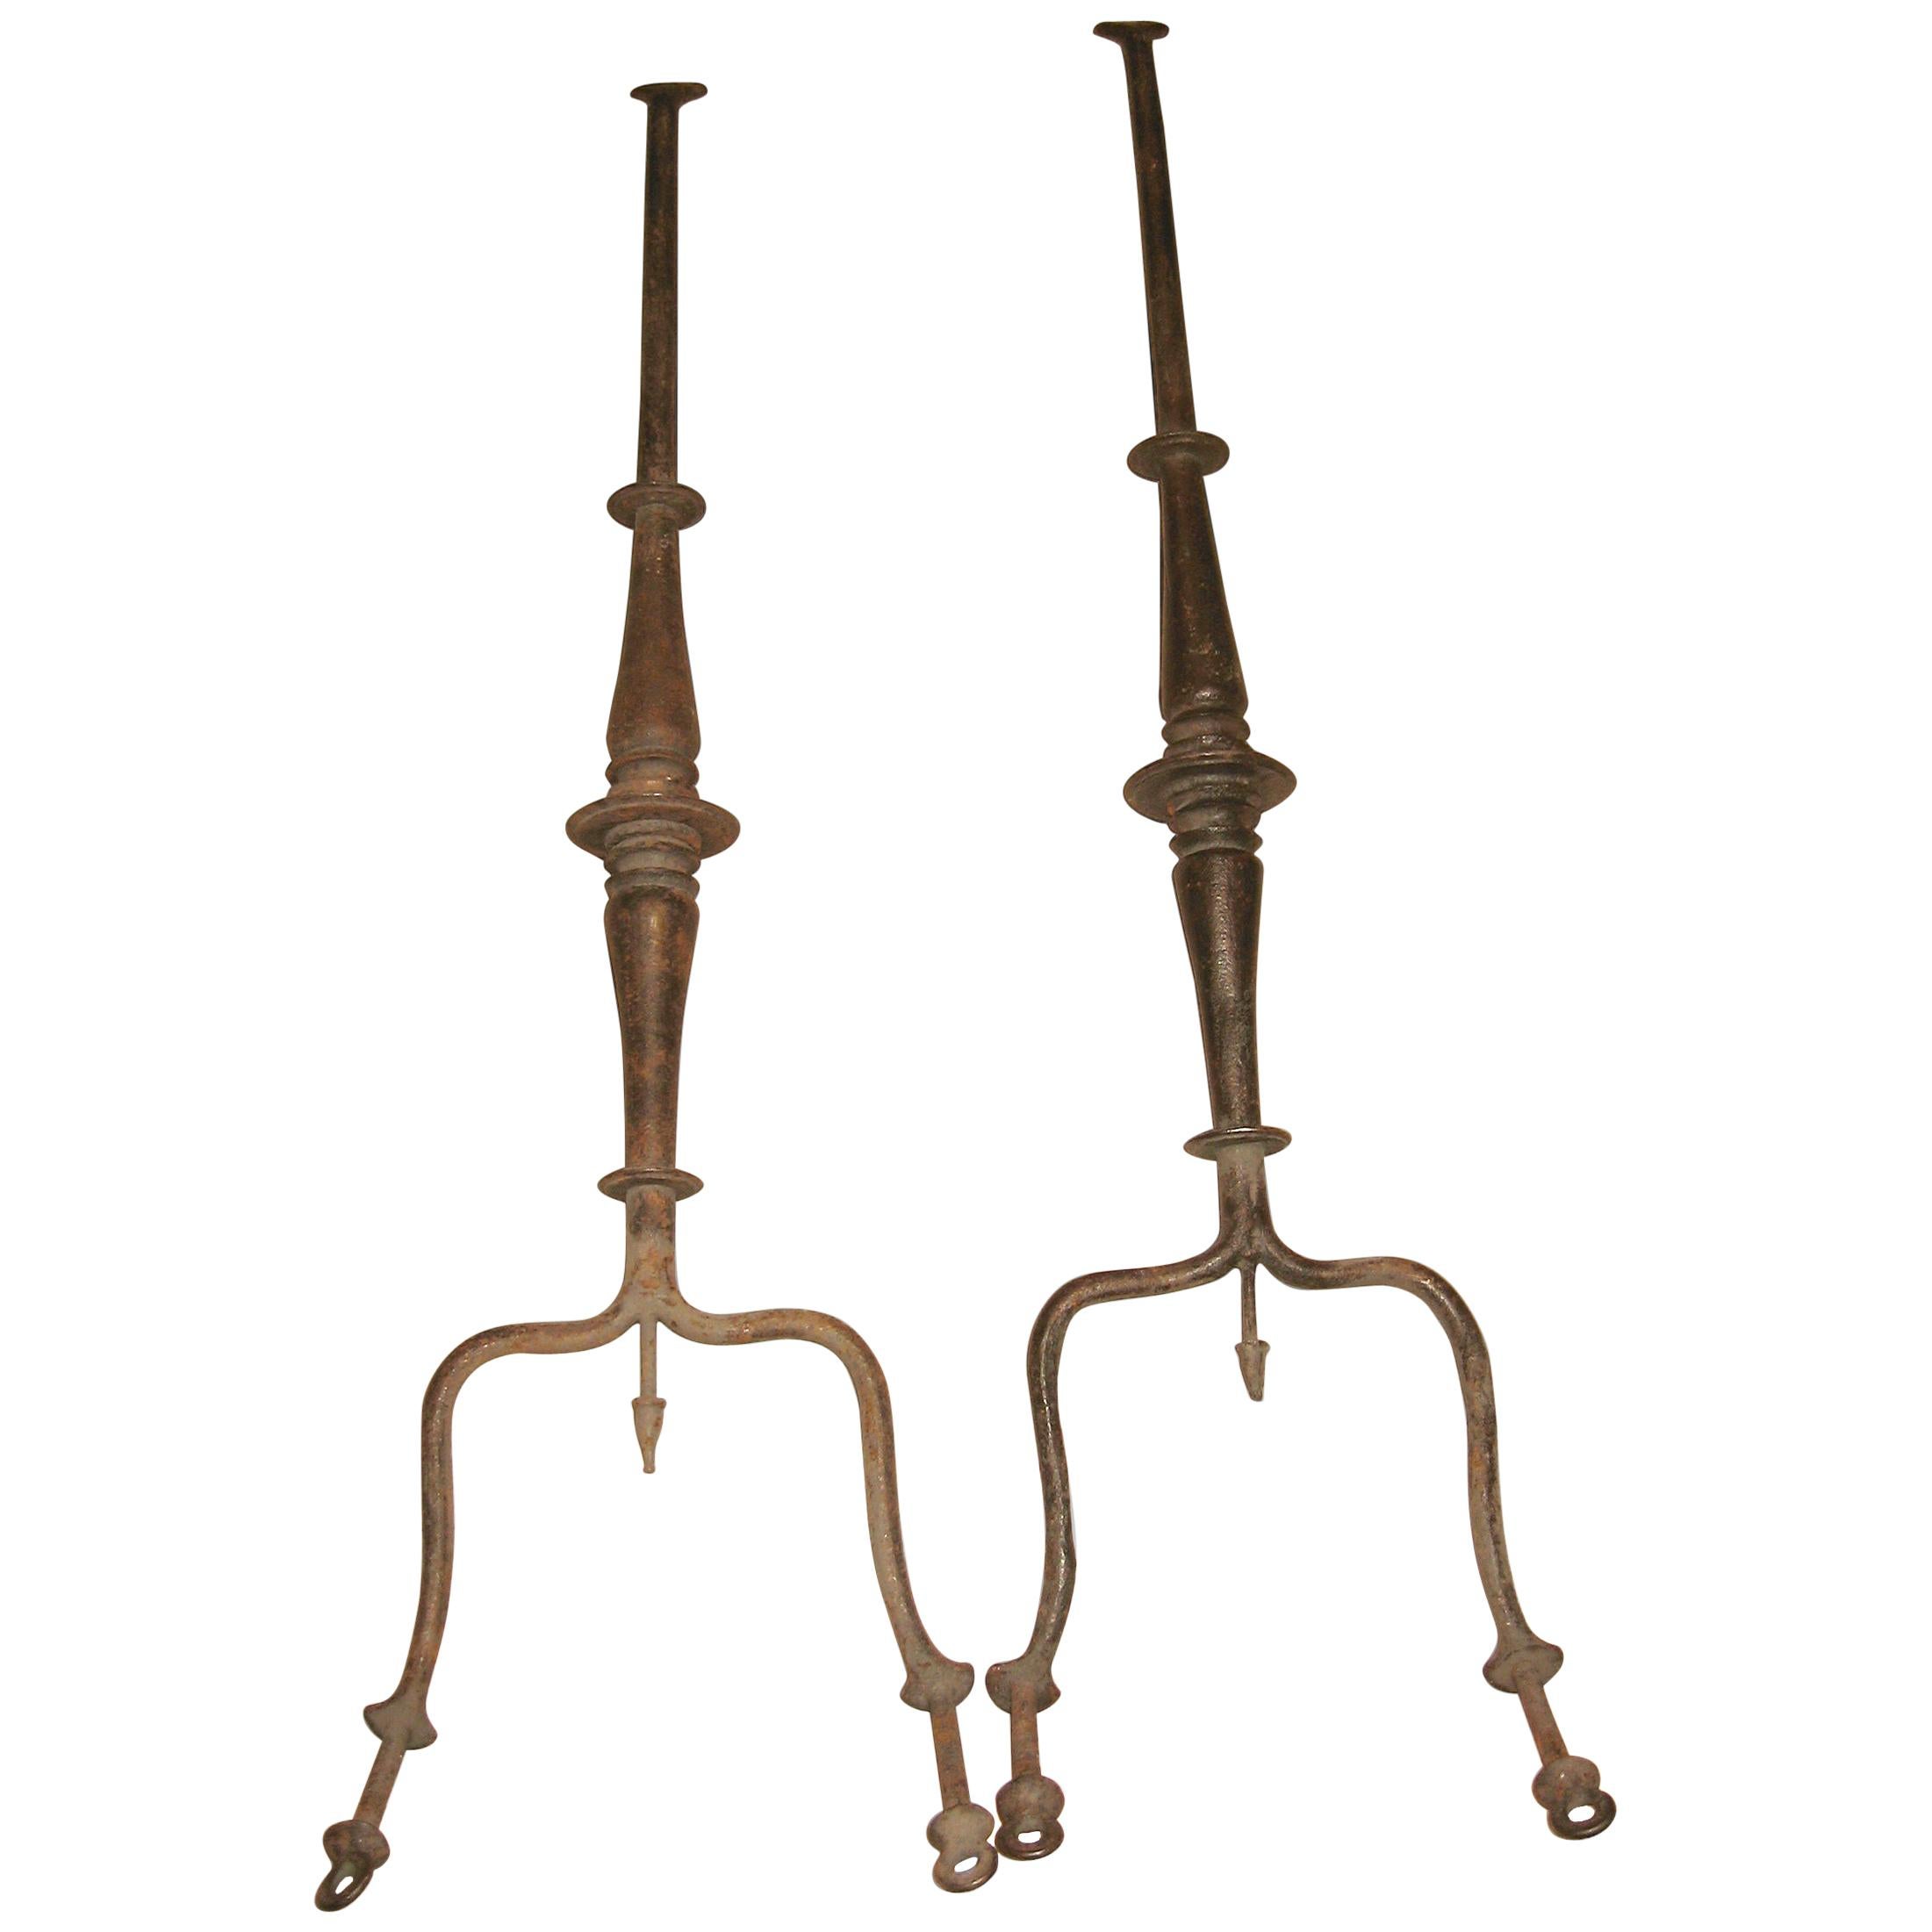 Wrought Iron Fasterners, 17th Century